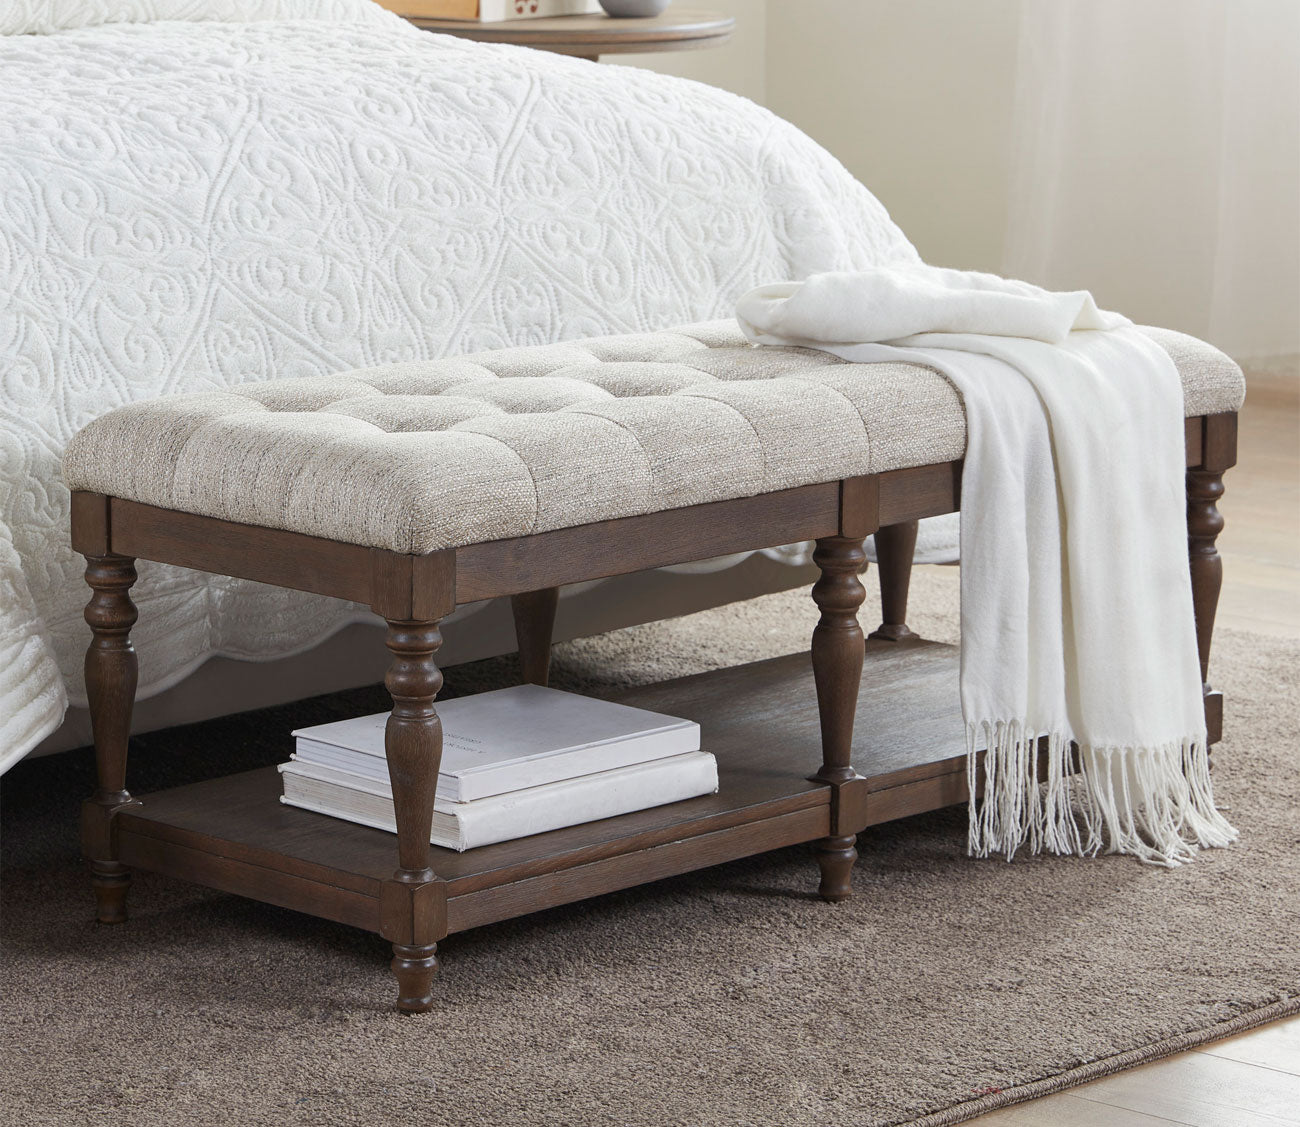 Highland Button Tufted Wood Accent Bench with Shelf by Martha Stewart